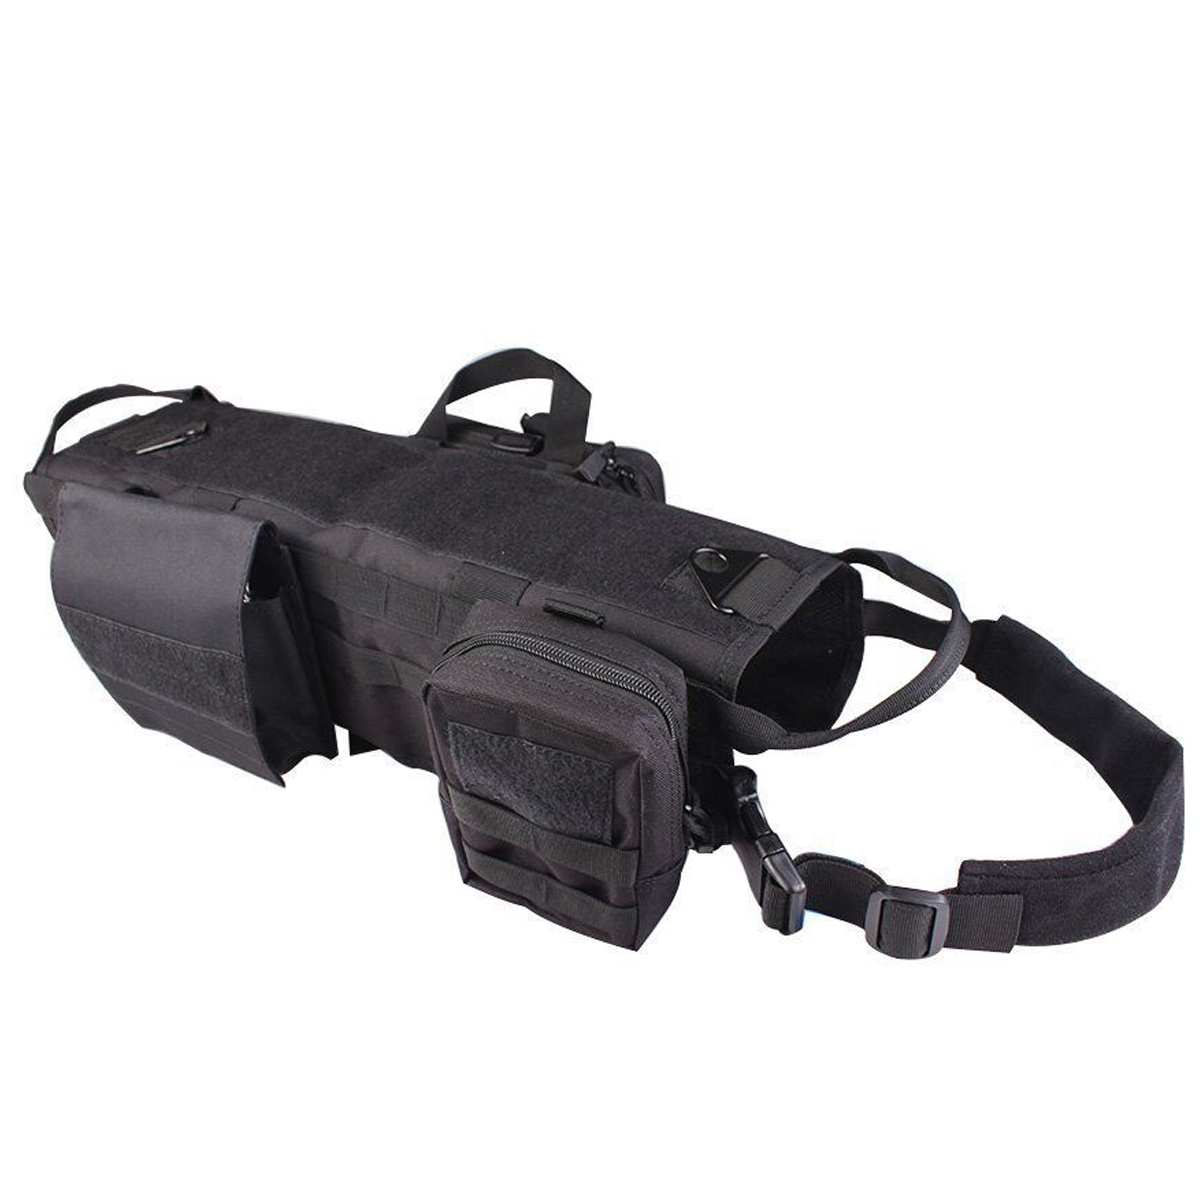 600D-Nylon-Tactical-Dog-Vests-Military-Dog-Clothes-with-Storage-Bag-Training-Load-Bearing-Harness-1817367-4